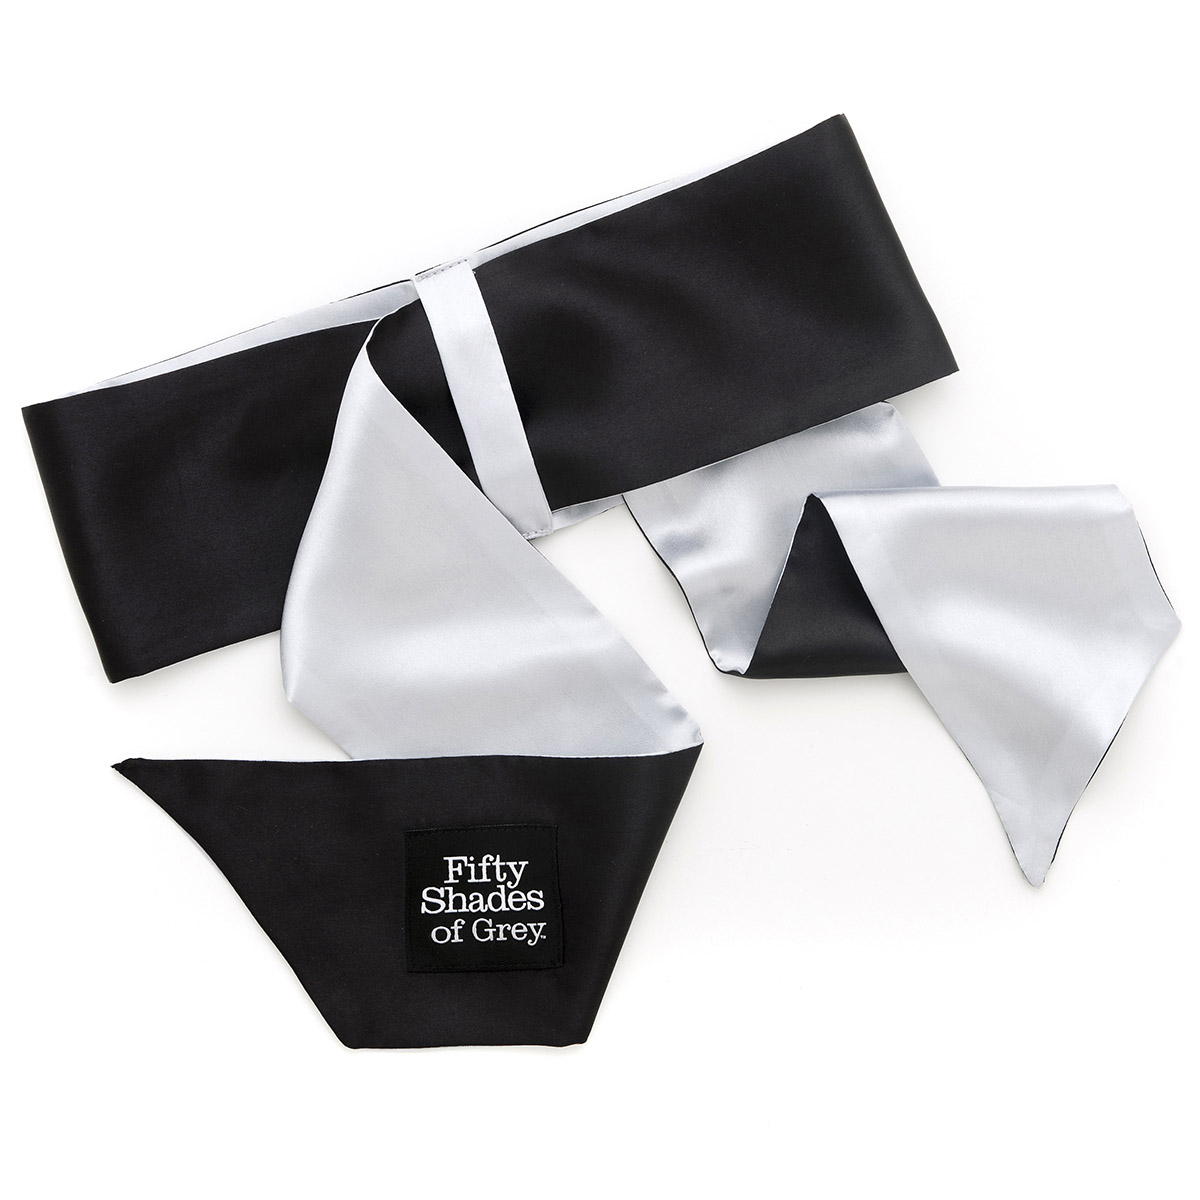 Lovehoney/Fifty Shades Fifty Shades - Soft Limits Deluxe Restraint ...